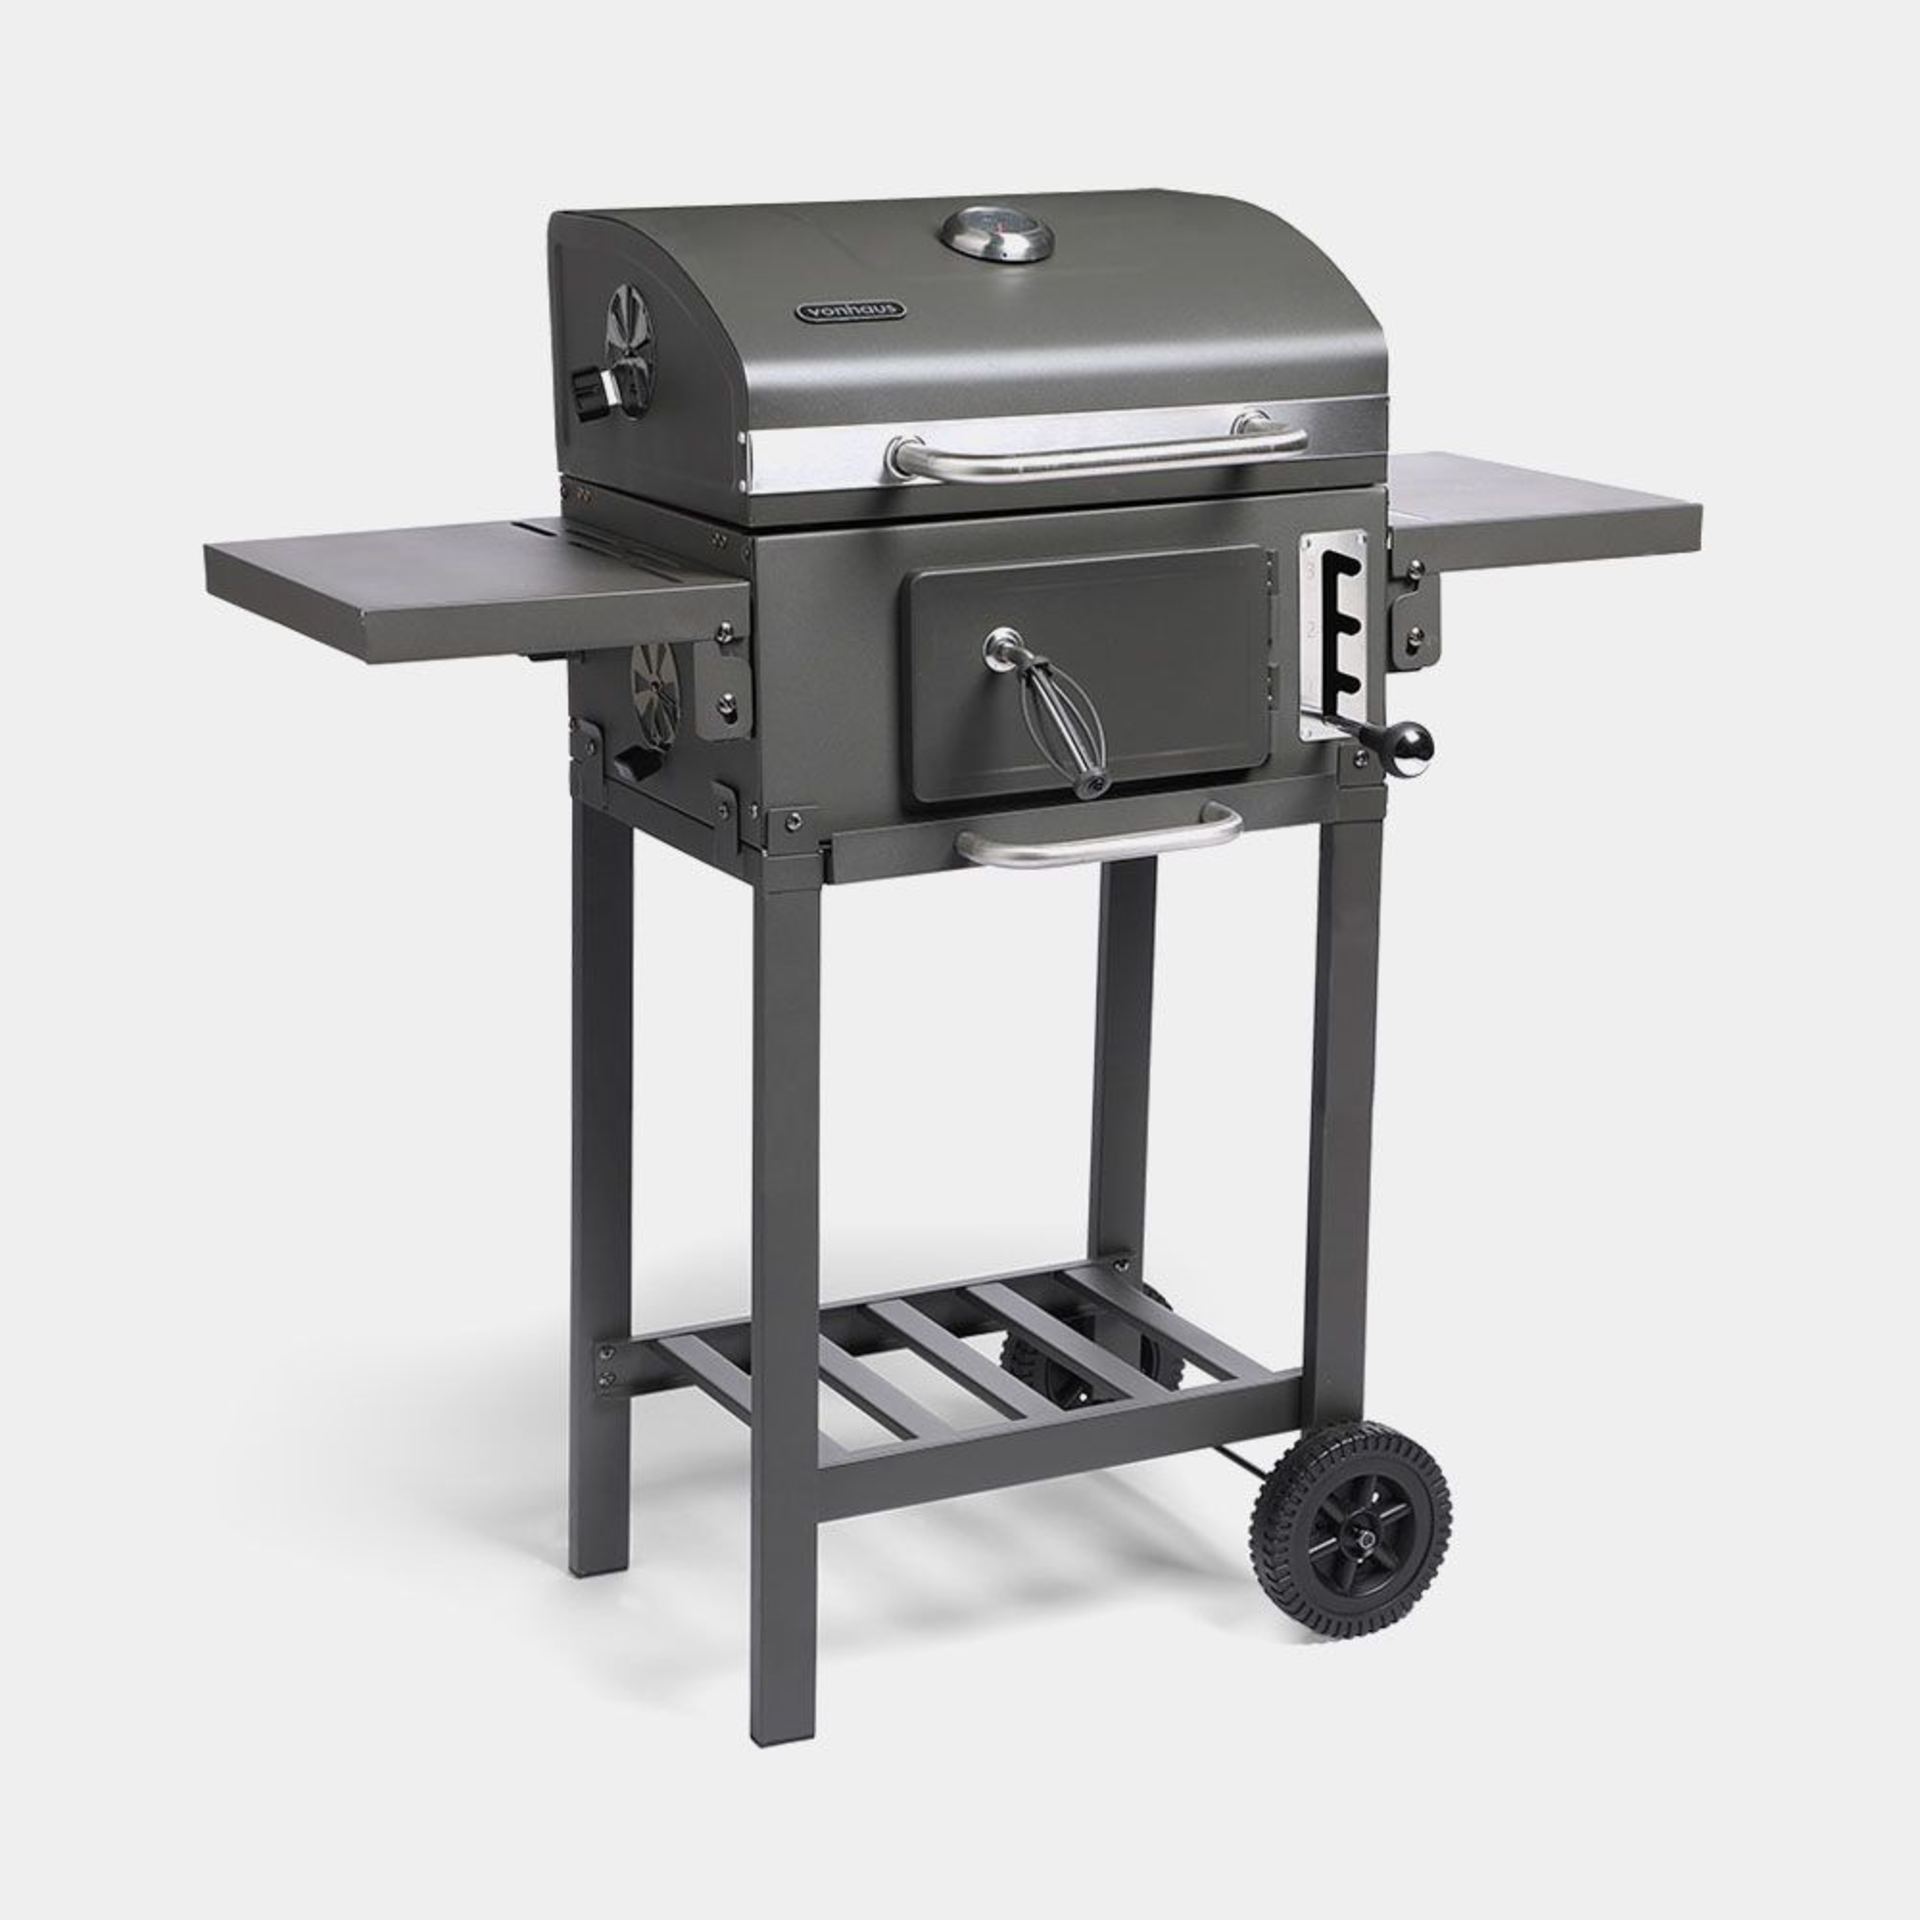 Compact Charcoal BBQ. - BI. Level up your home barbecues with our versatile 2-in-1 barbecue,